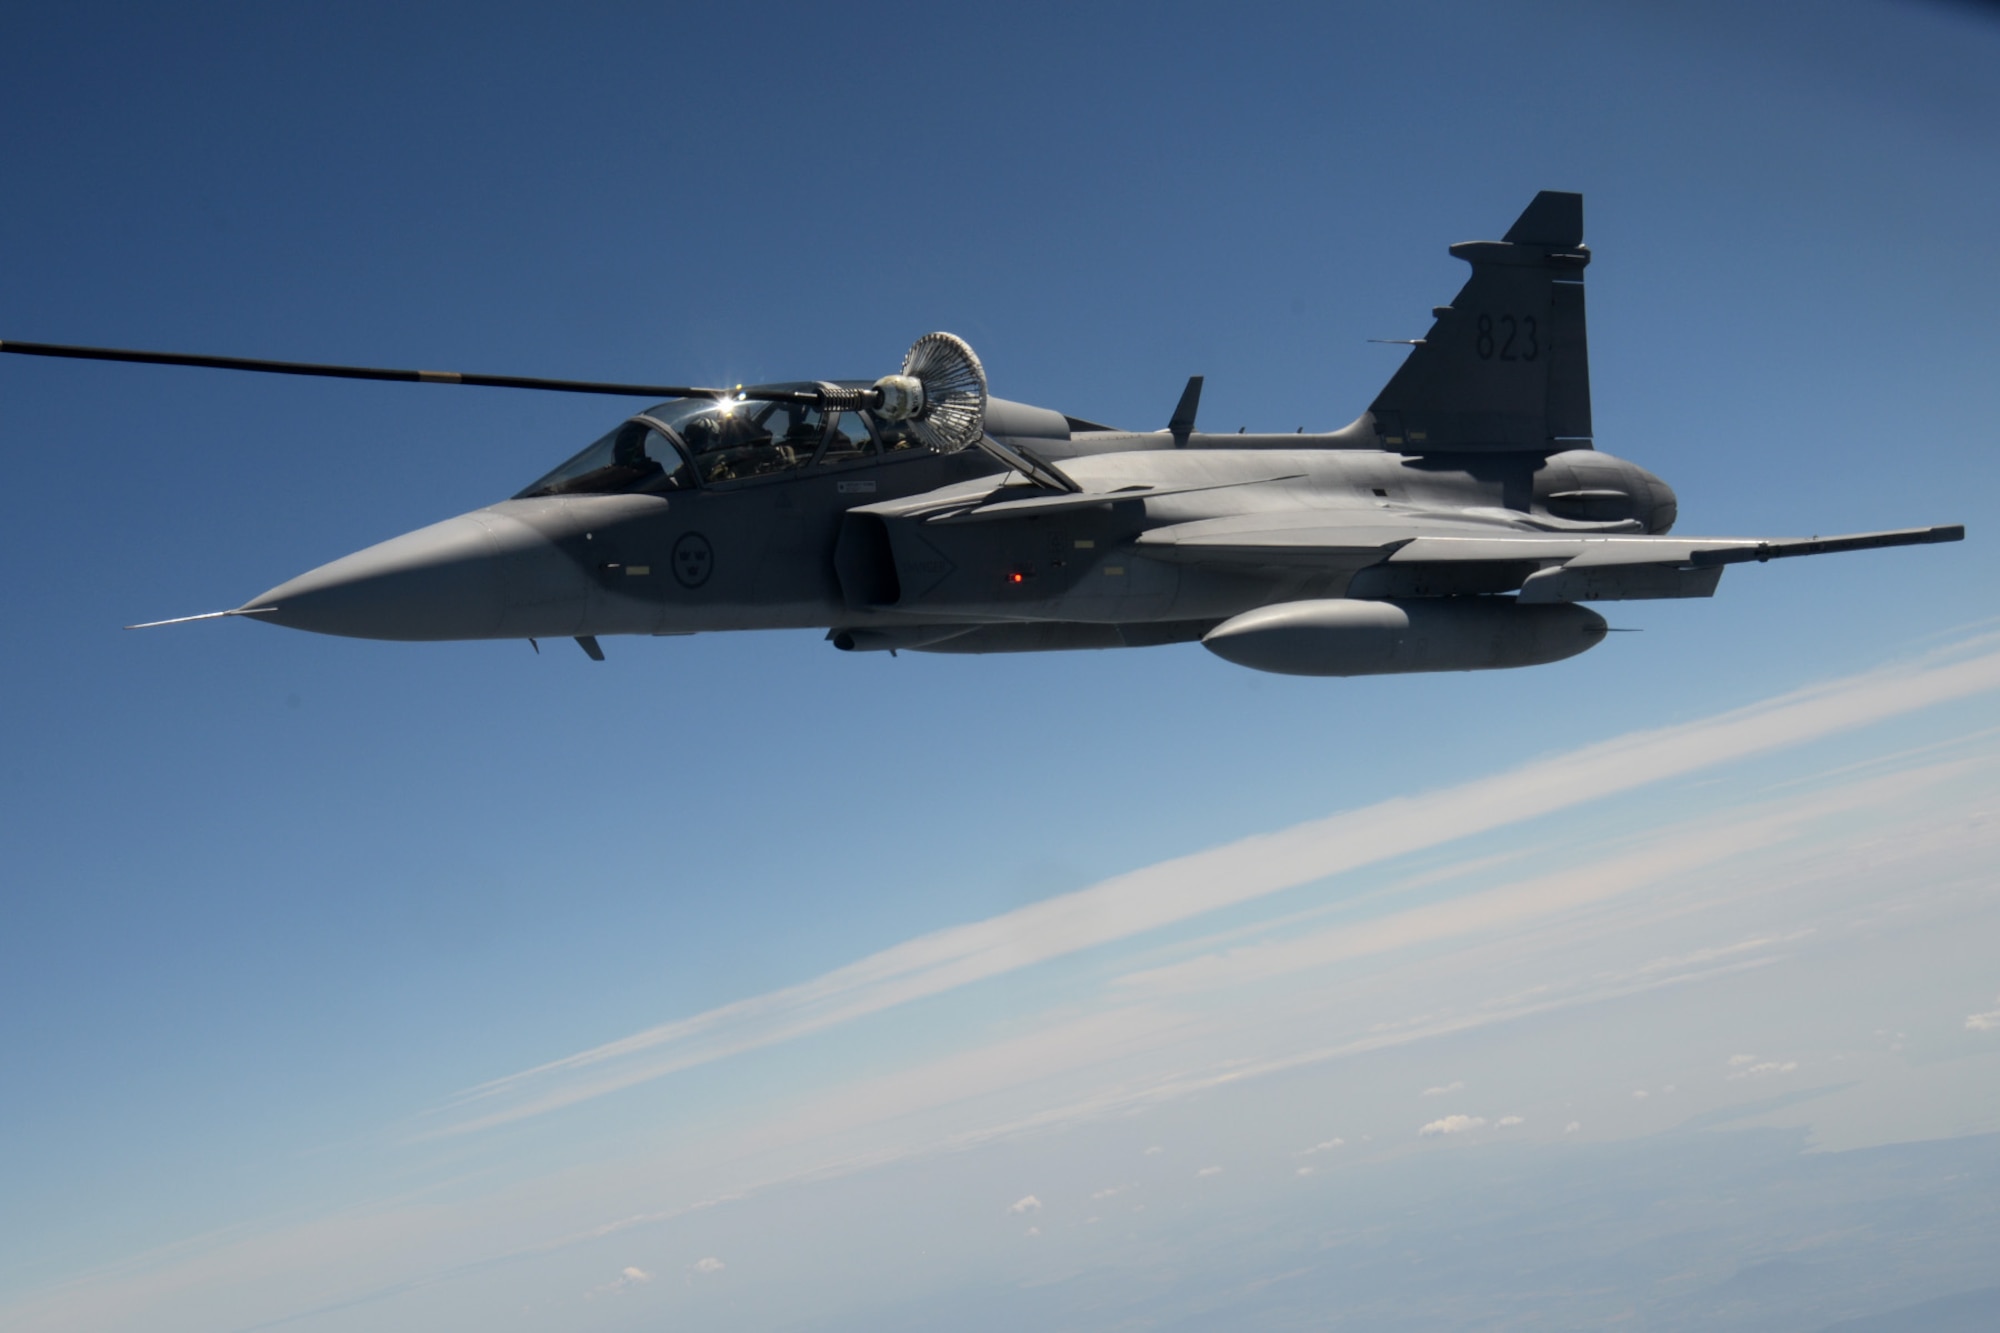 A Hungarian air force JAS-39 Gripen makes contact with a multi-point refueling system basket June 26, 2015, during air refueling familiarization training over Hungary. Hungarian, U.S. and Swedish air force personnel met for a two-week familiarization period enabling the Hungarian JAS-39 Gripen pilots to successfully perform air refueling for the first time. (U.S. Air Force photo by Senior Airman Kate Thornton/Released)